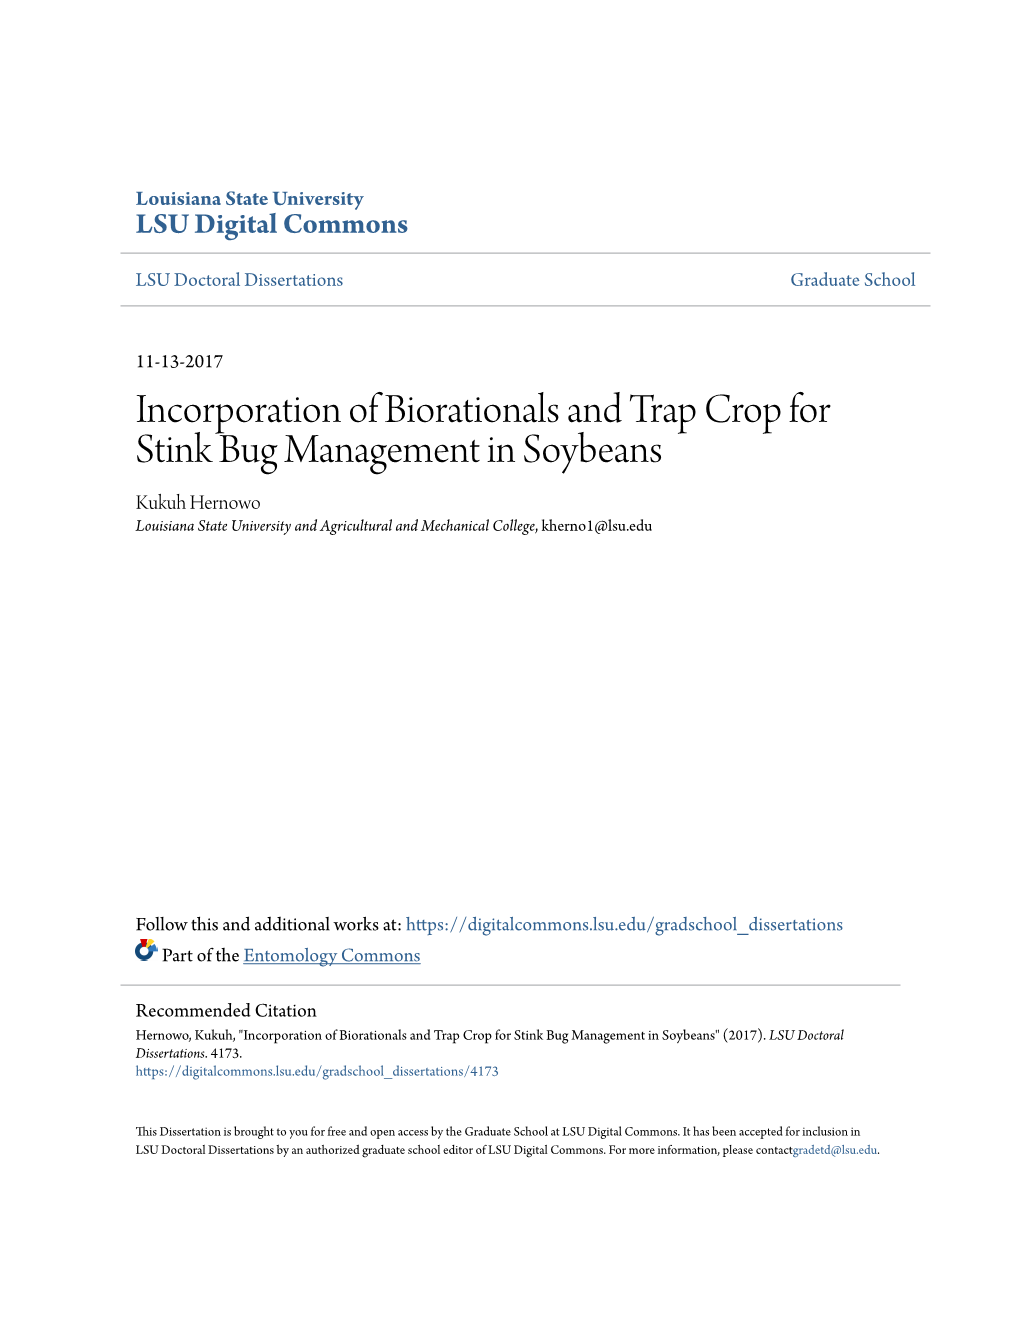 Incorporation of Biorationals and Trap Crop for Stink Bug Management In